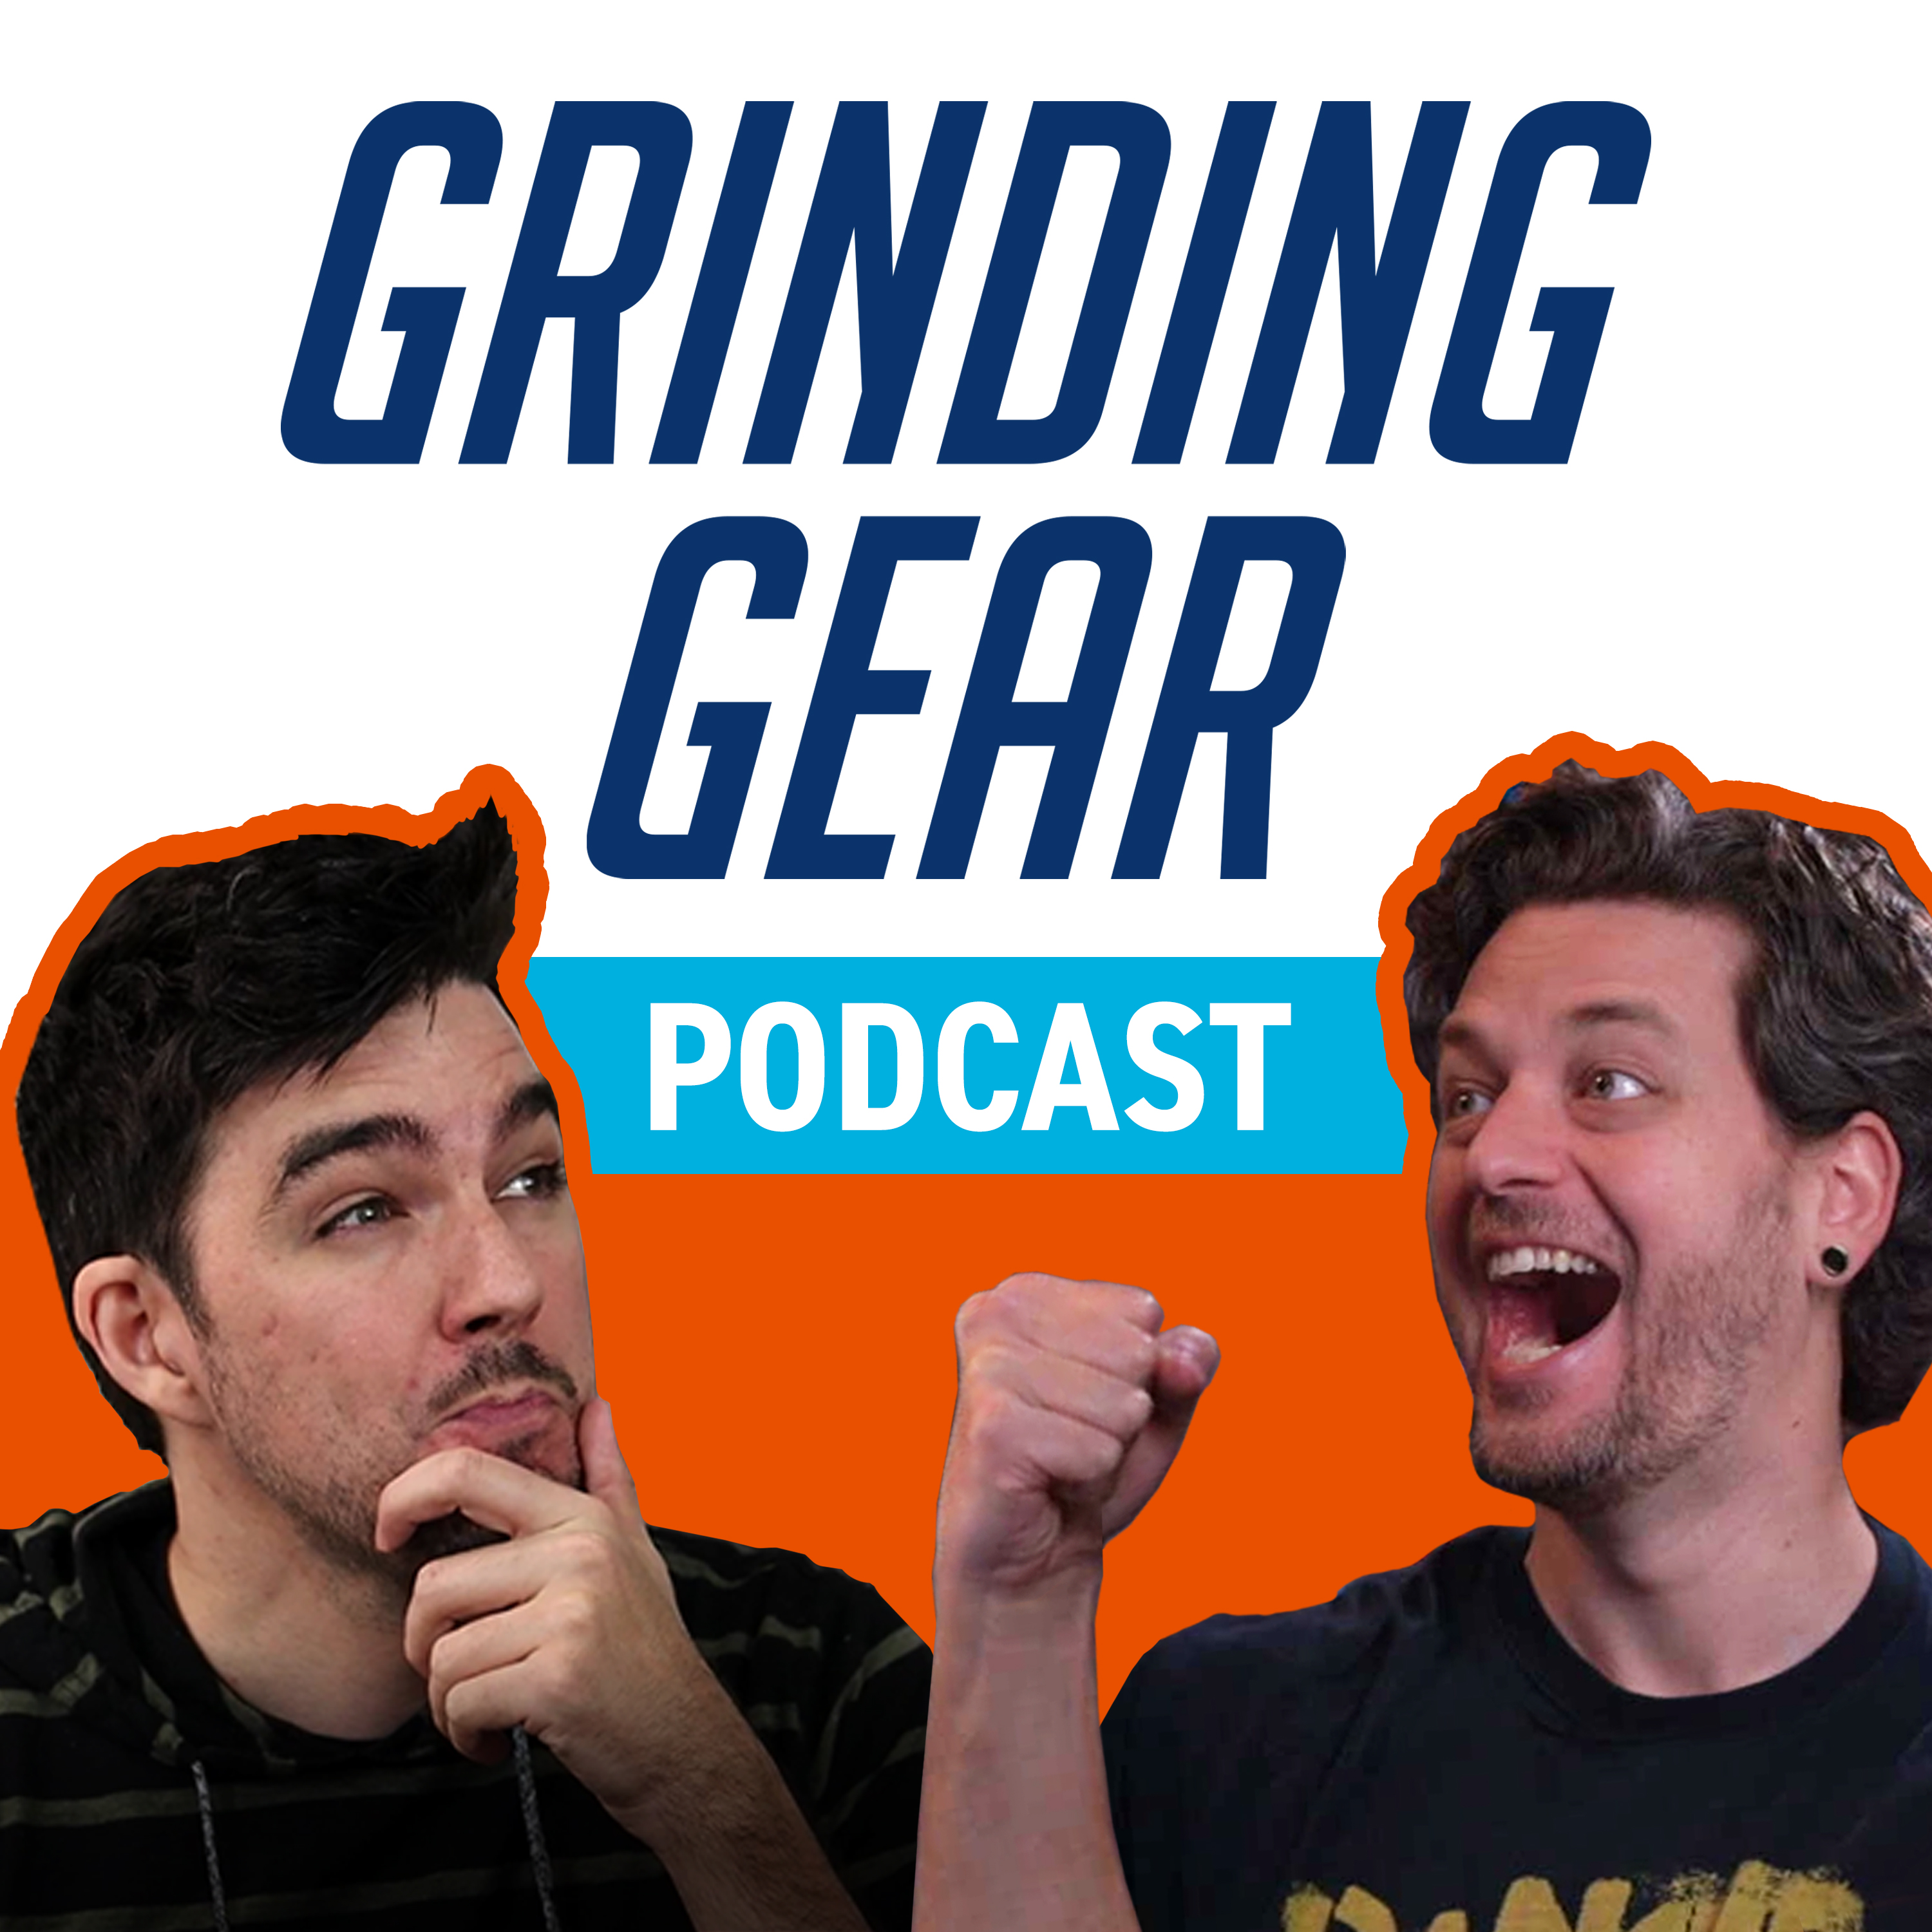 The Grinding Gear Podcast